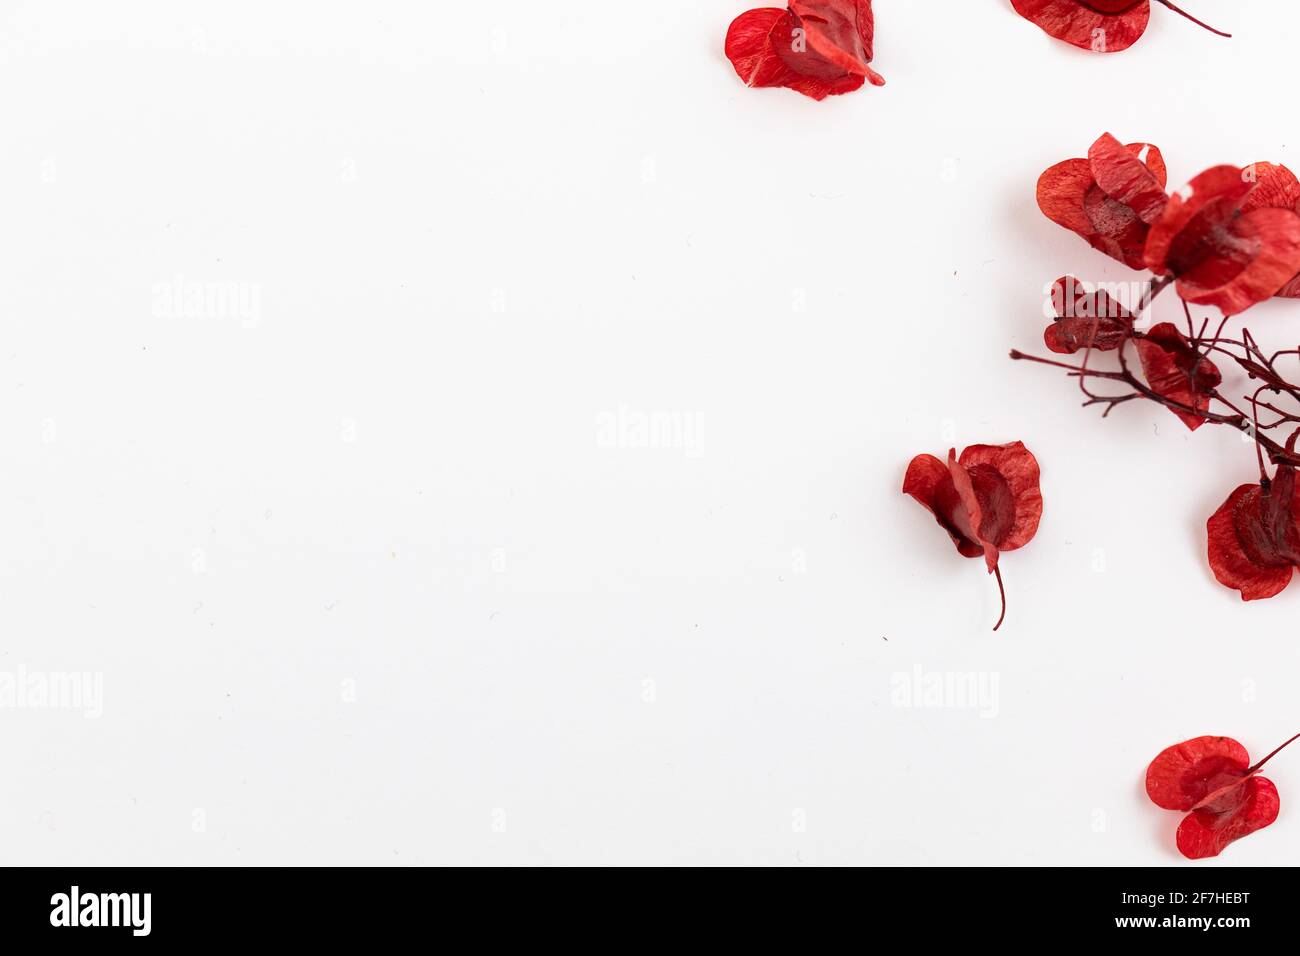 Biodegradable confetti from dried flowers, flat lay background photo Stock Photo